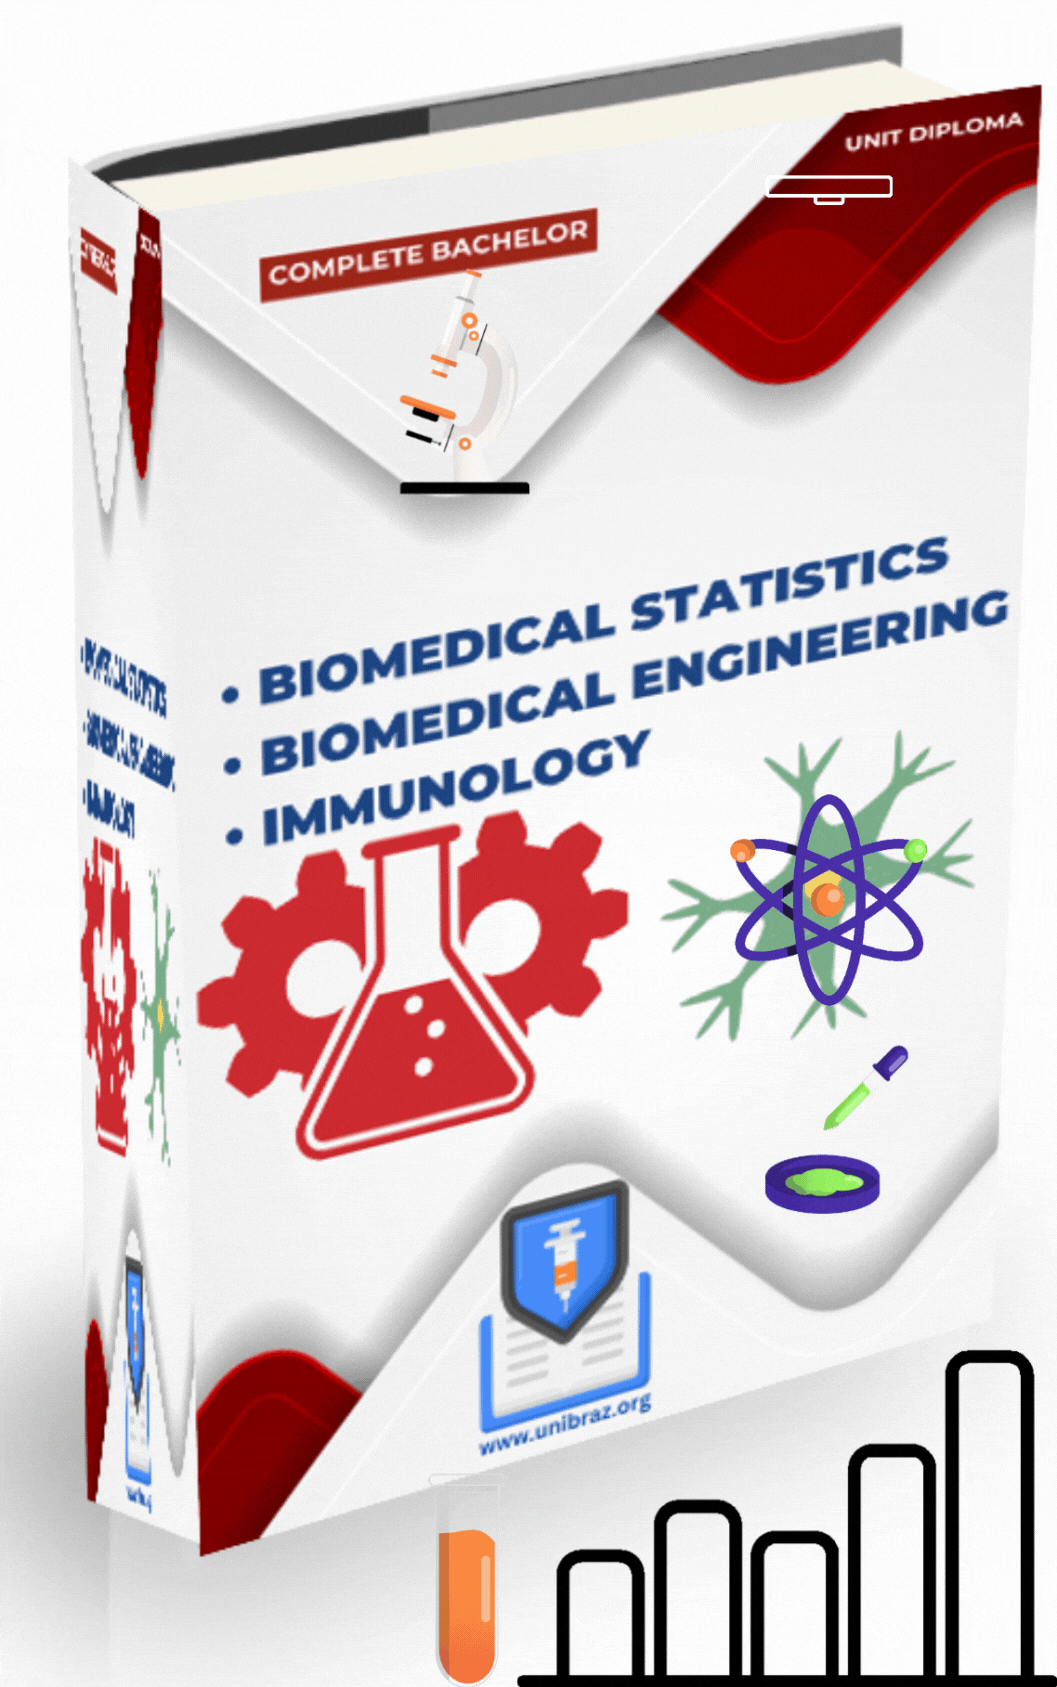 BACHELOR OF SCIENCE (BSc.) BIOMEDICAL STATISTICS | BIOMEDICAL ENGINEERING AND IMMUNOLOGY (WITH DIPLOMA UNIT OPTIONAL STUDY)